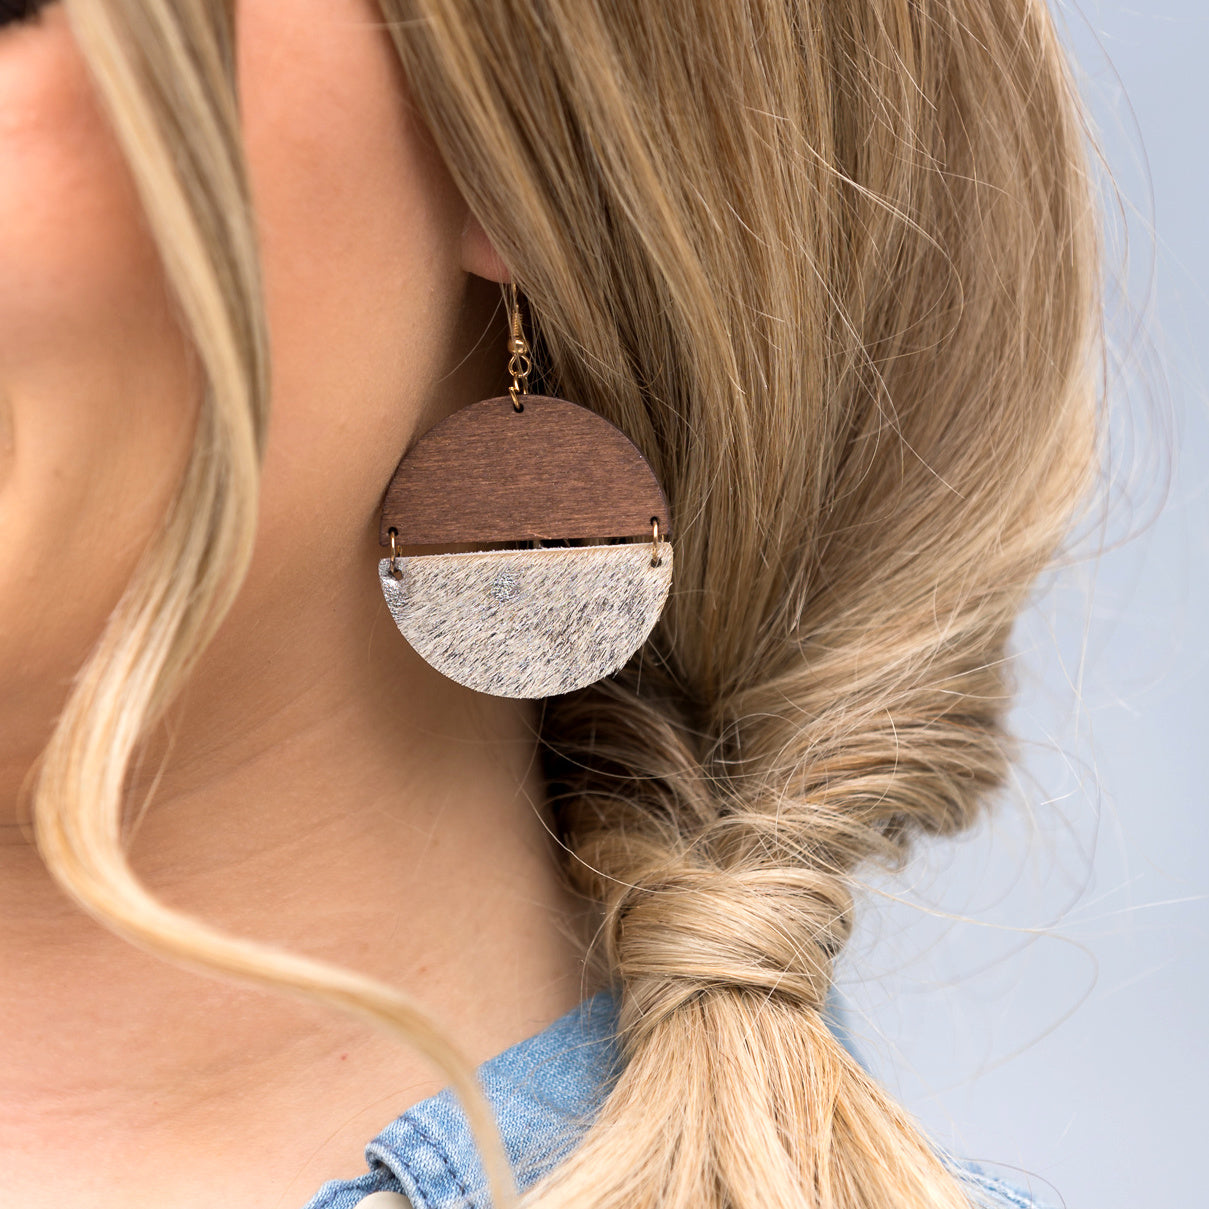 Everyday Leather & Wood Earrings